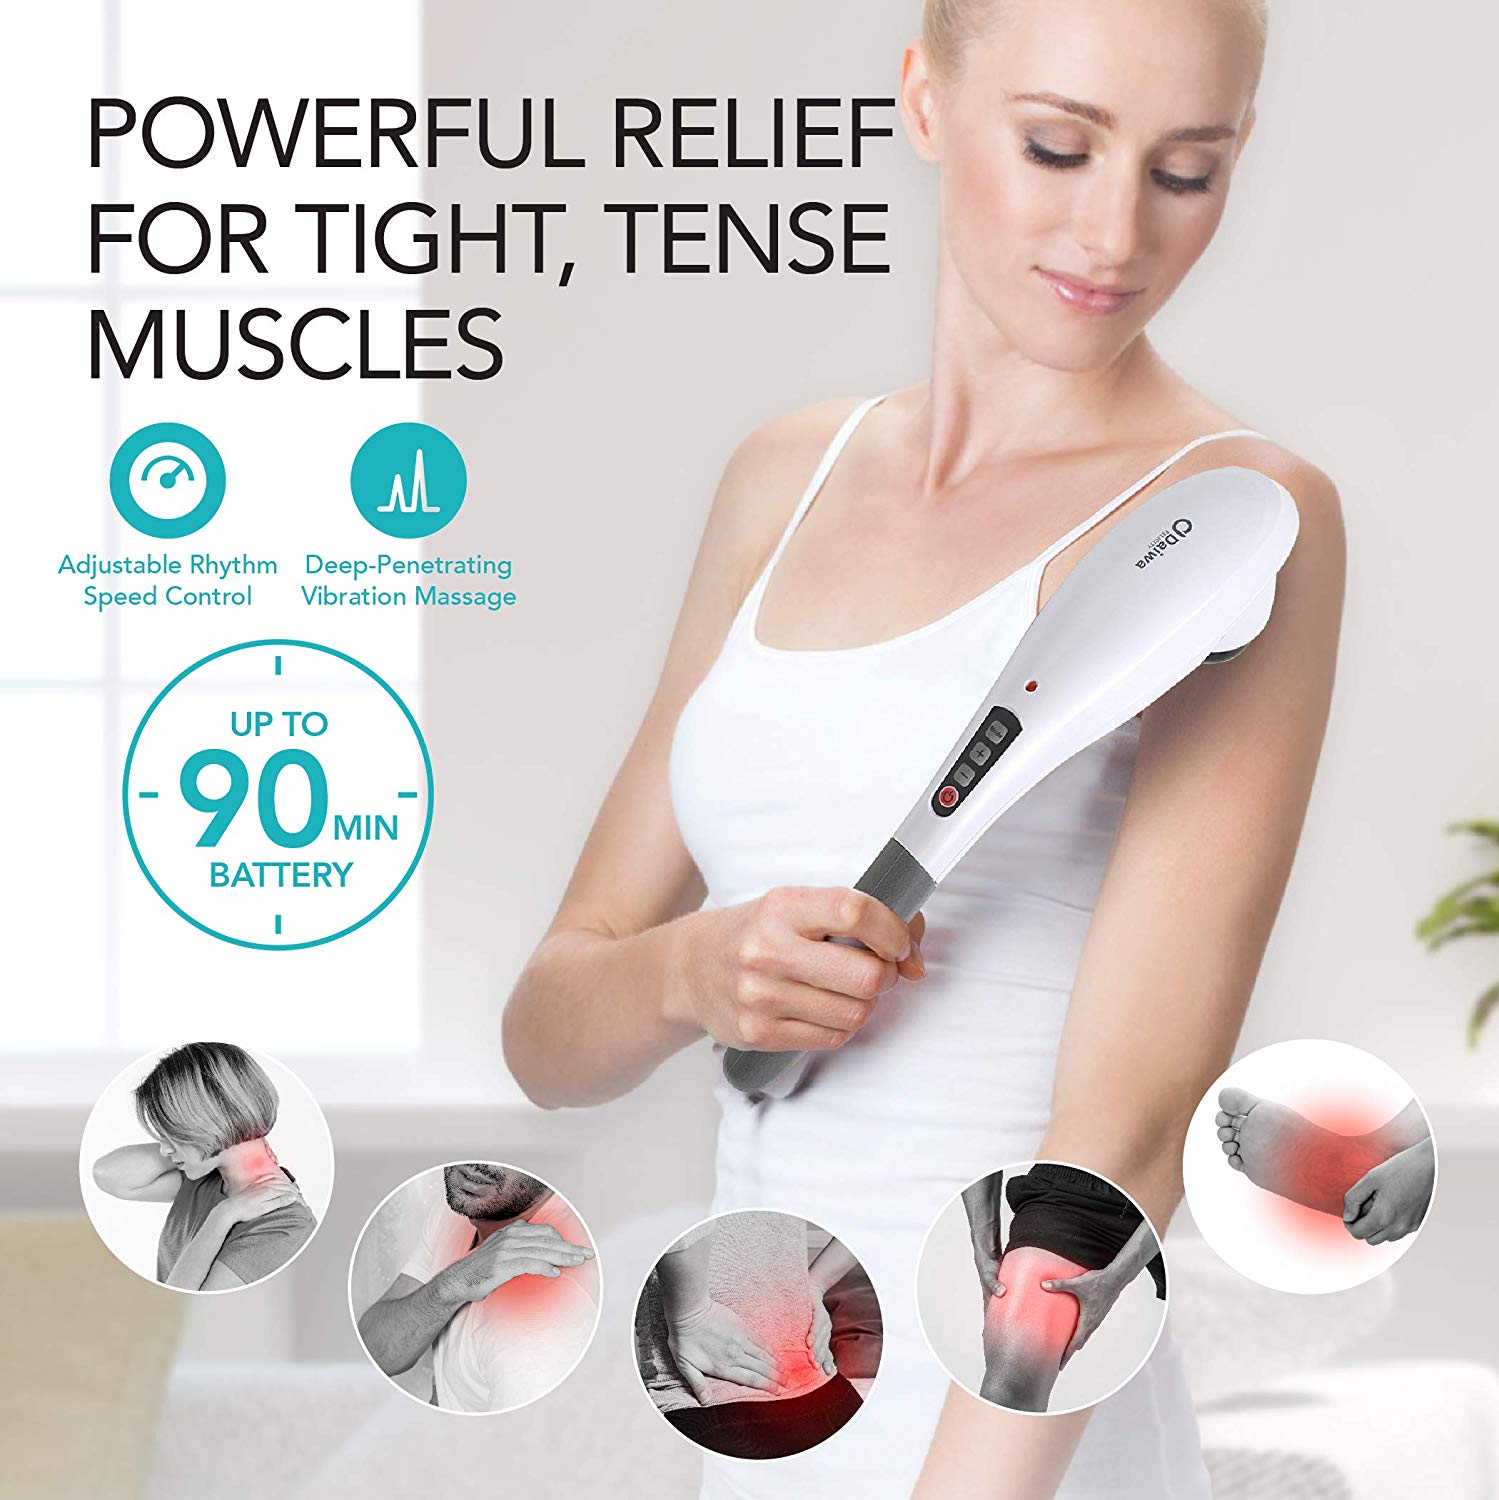 US Jaclean Tapping Pro Handheld Massager